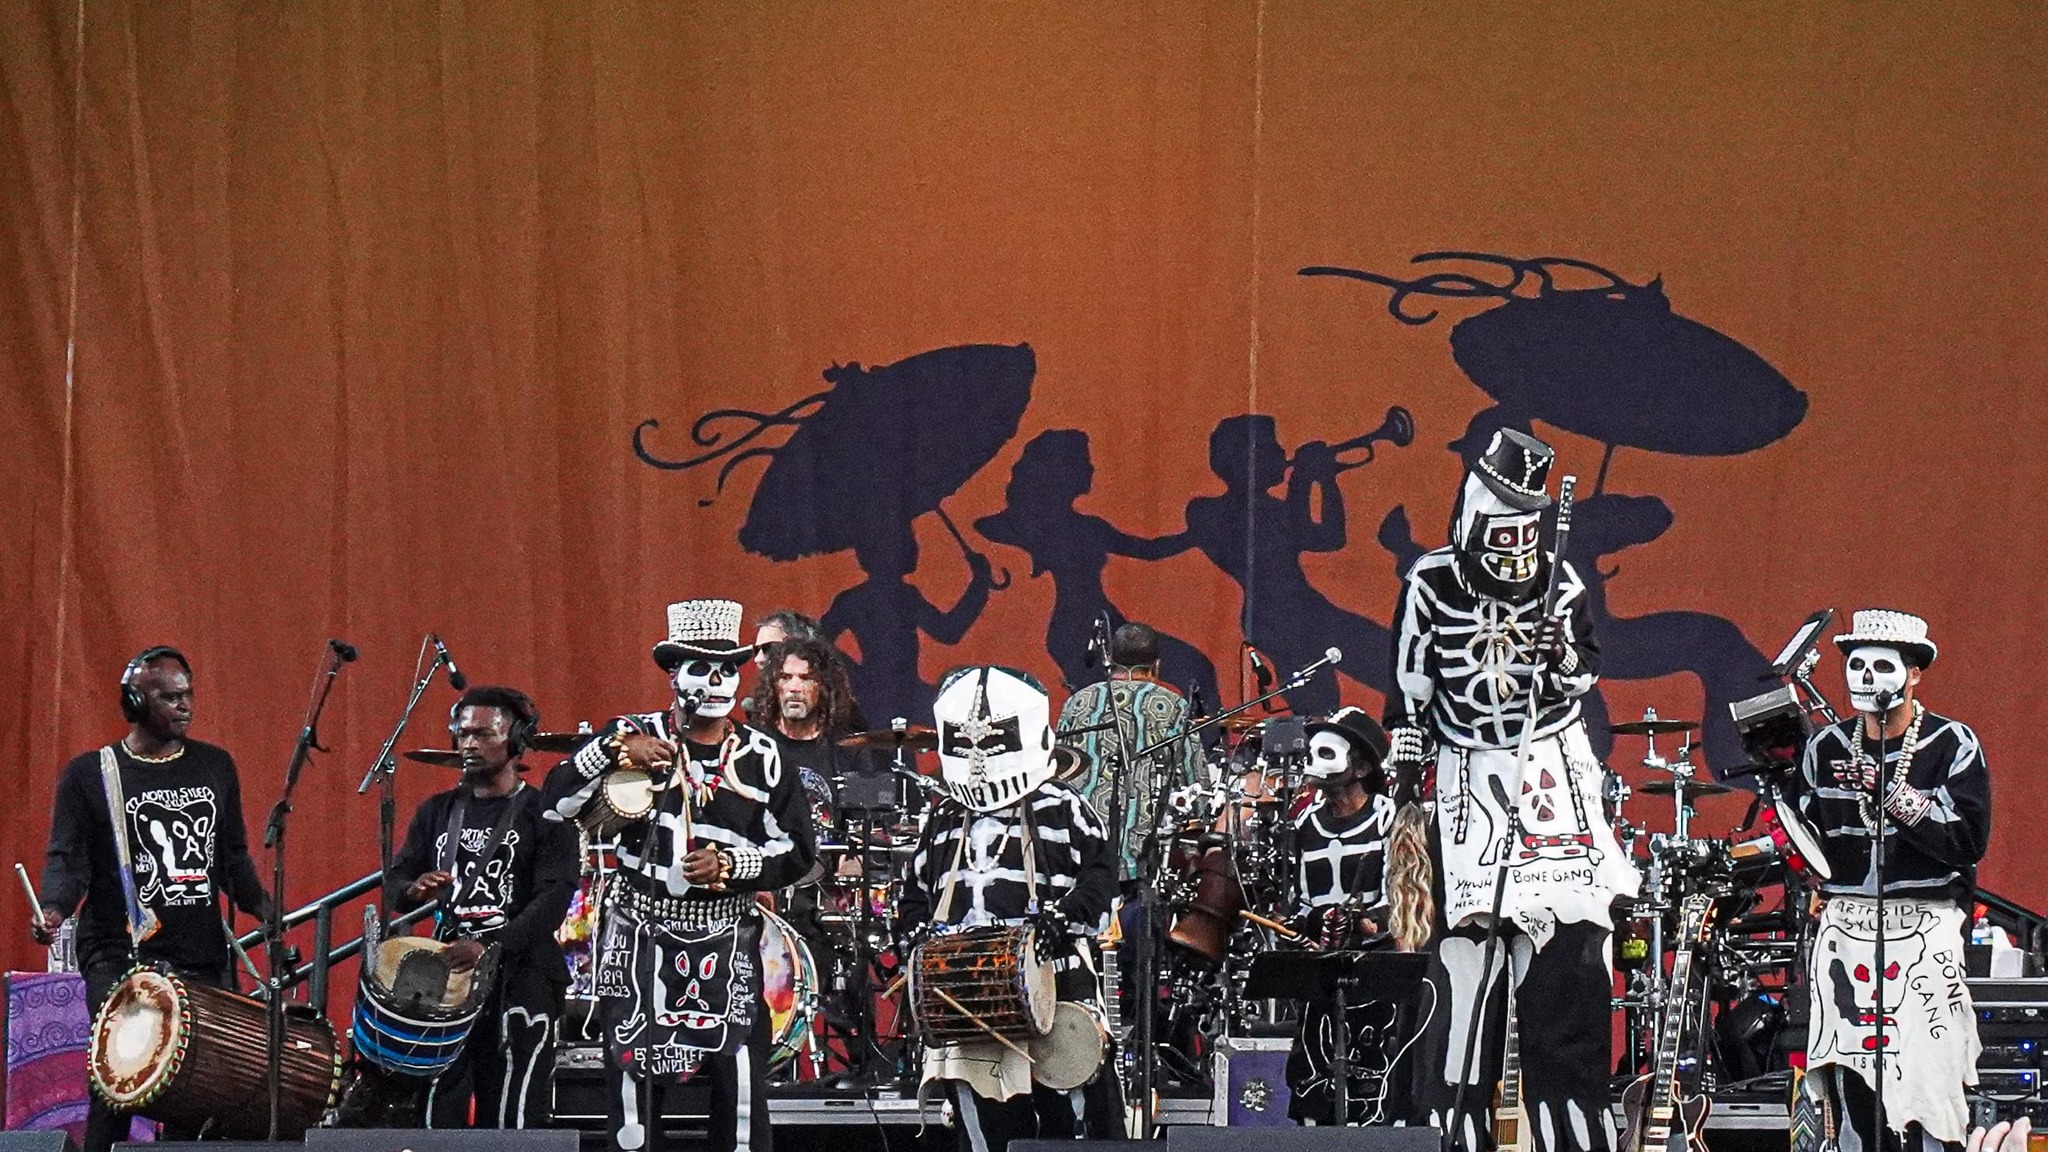 Big Chief “Sunpie” Barnes and the North Side Skull and Bone Gang with Mickey and Jay Lane